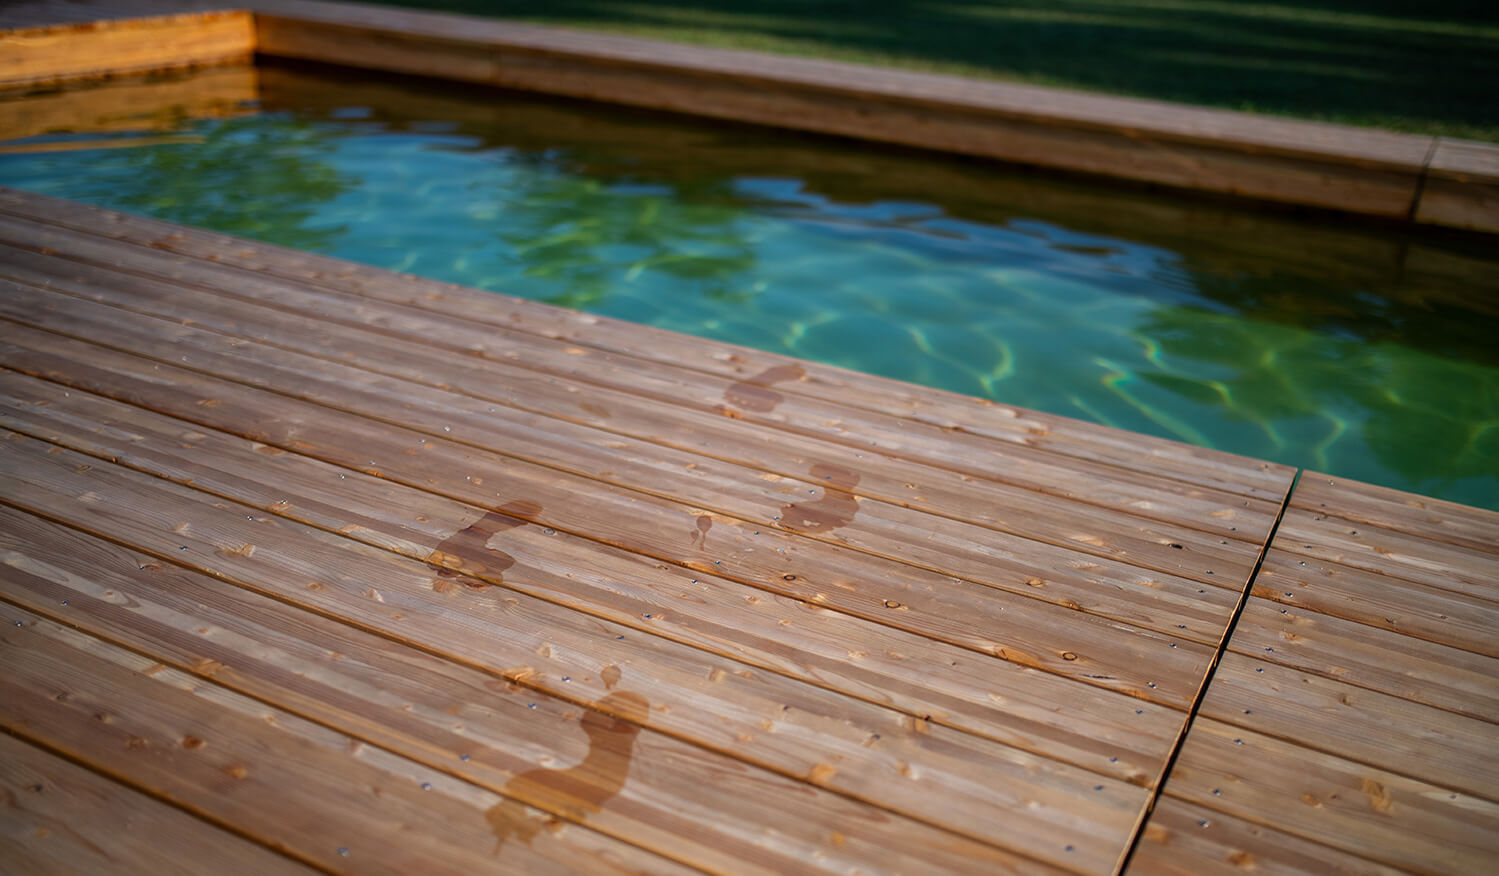 Your eco-footprint is very small when you buy a Holc natural pool